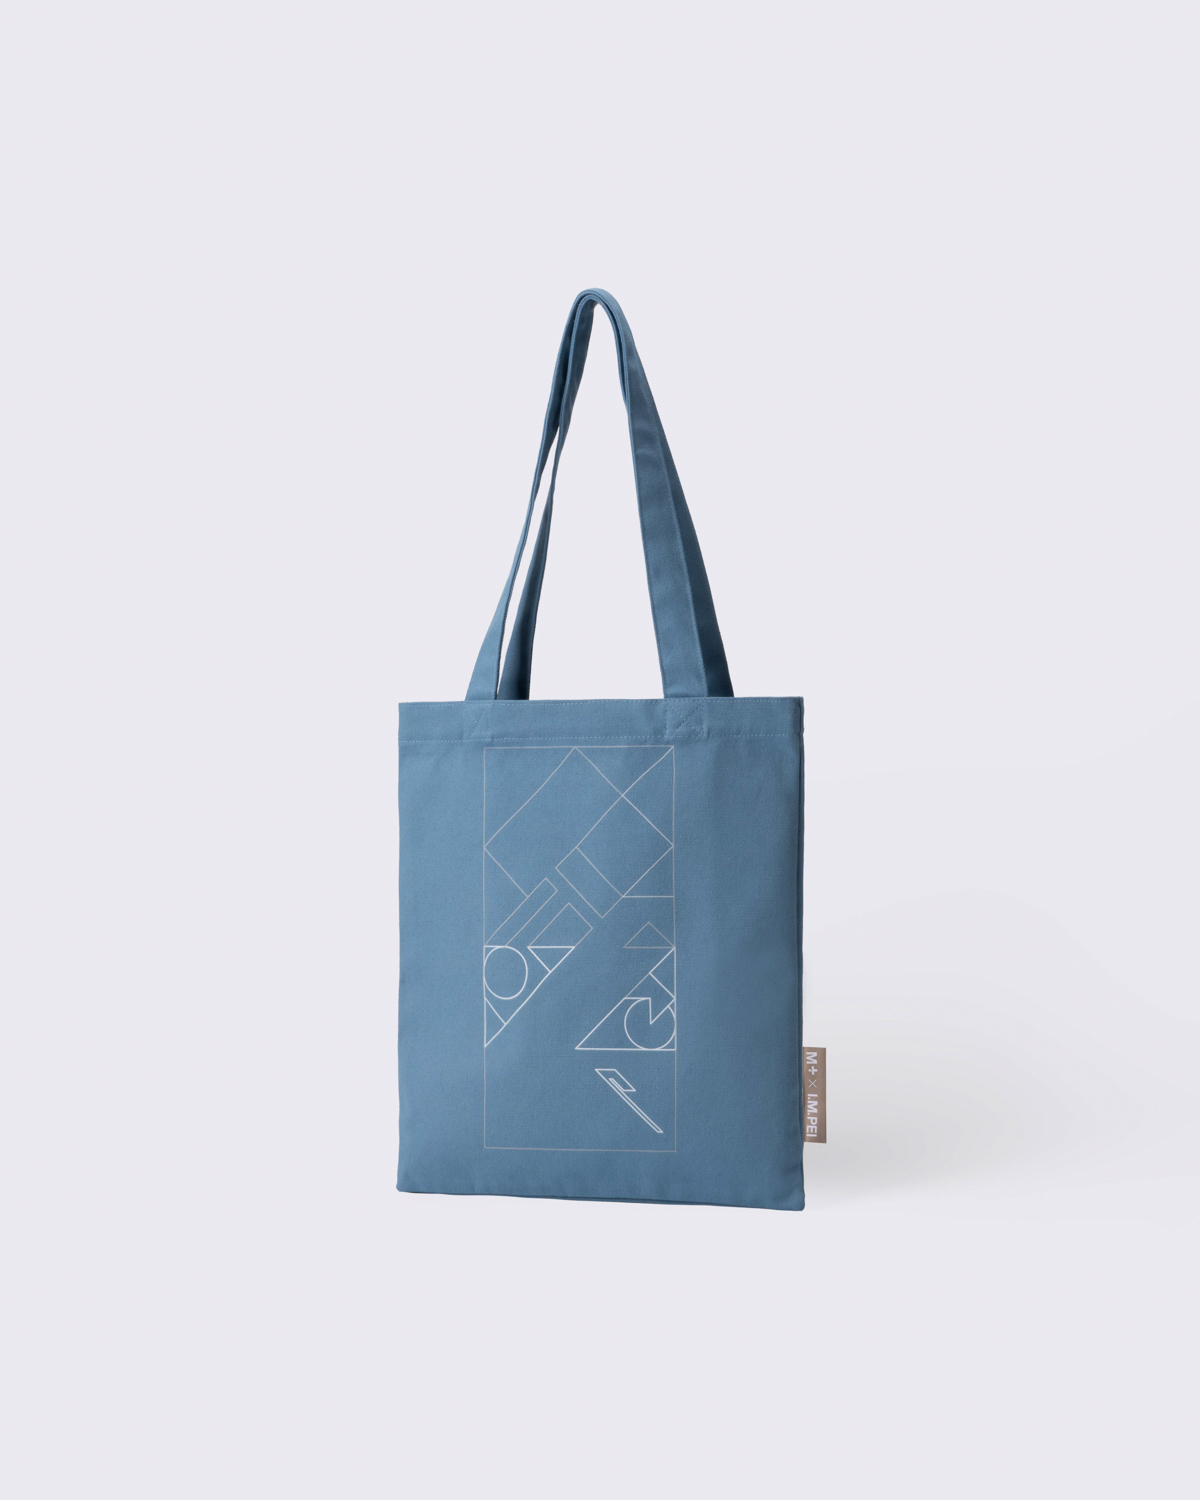 I.M.PEI, TOTE BAG, EXPO, Blue/The Republic of China Pavilion In Expo70, large